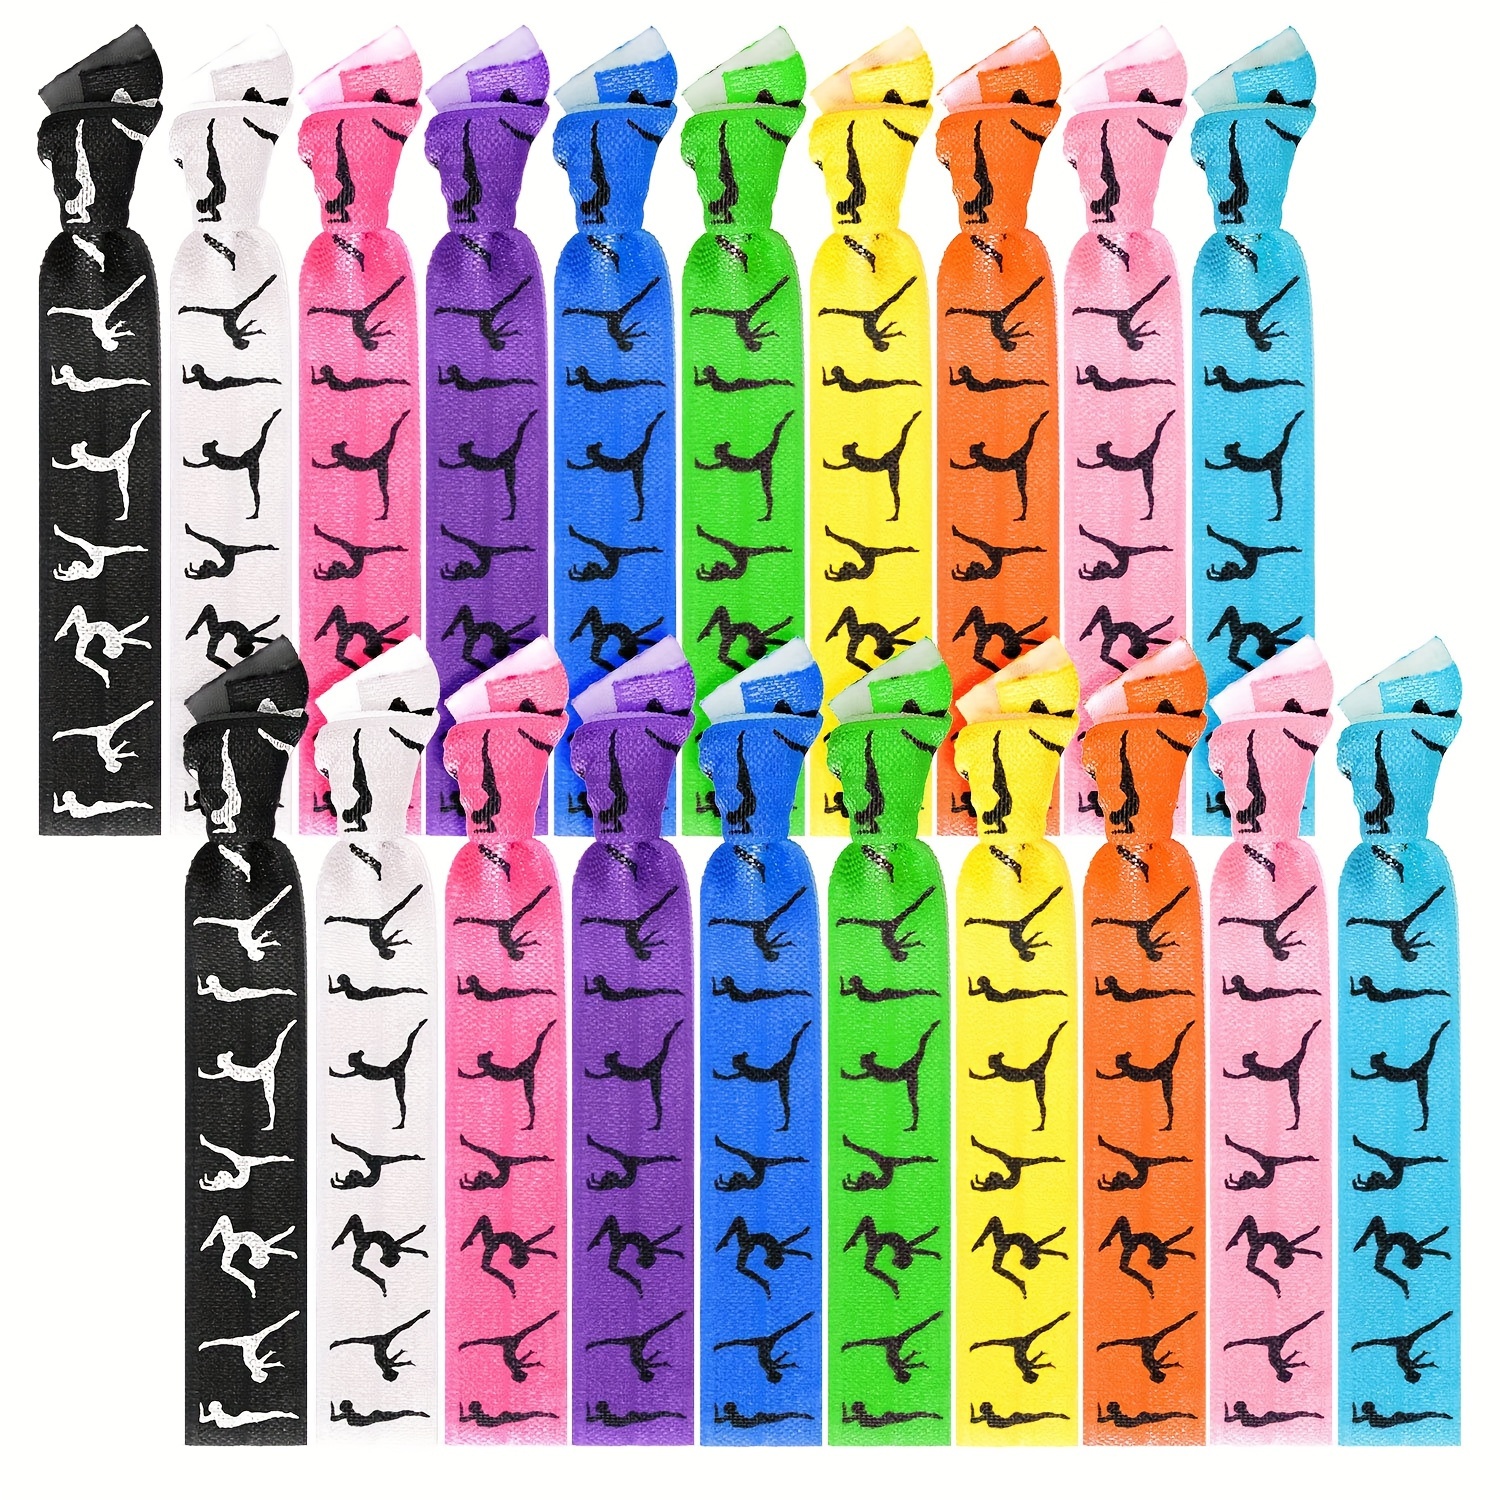 

A Set Of 10 Individual Gymnastics Sports Hair Bands Wristbands Sports Bracelet Hair Bands, 10 Colors